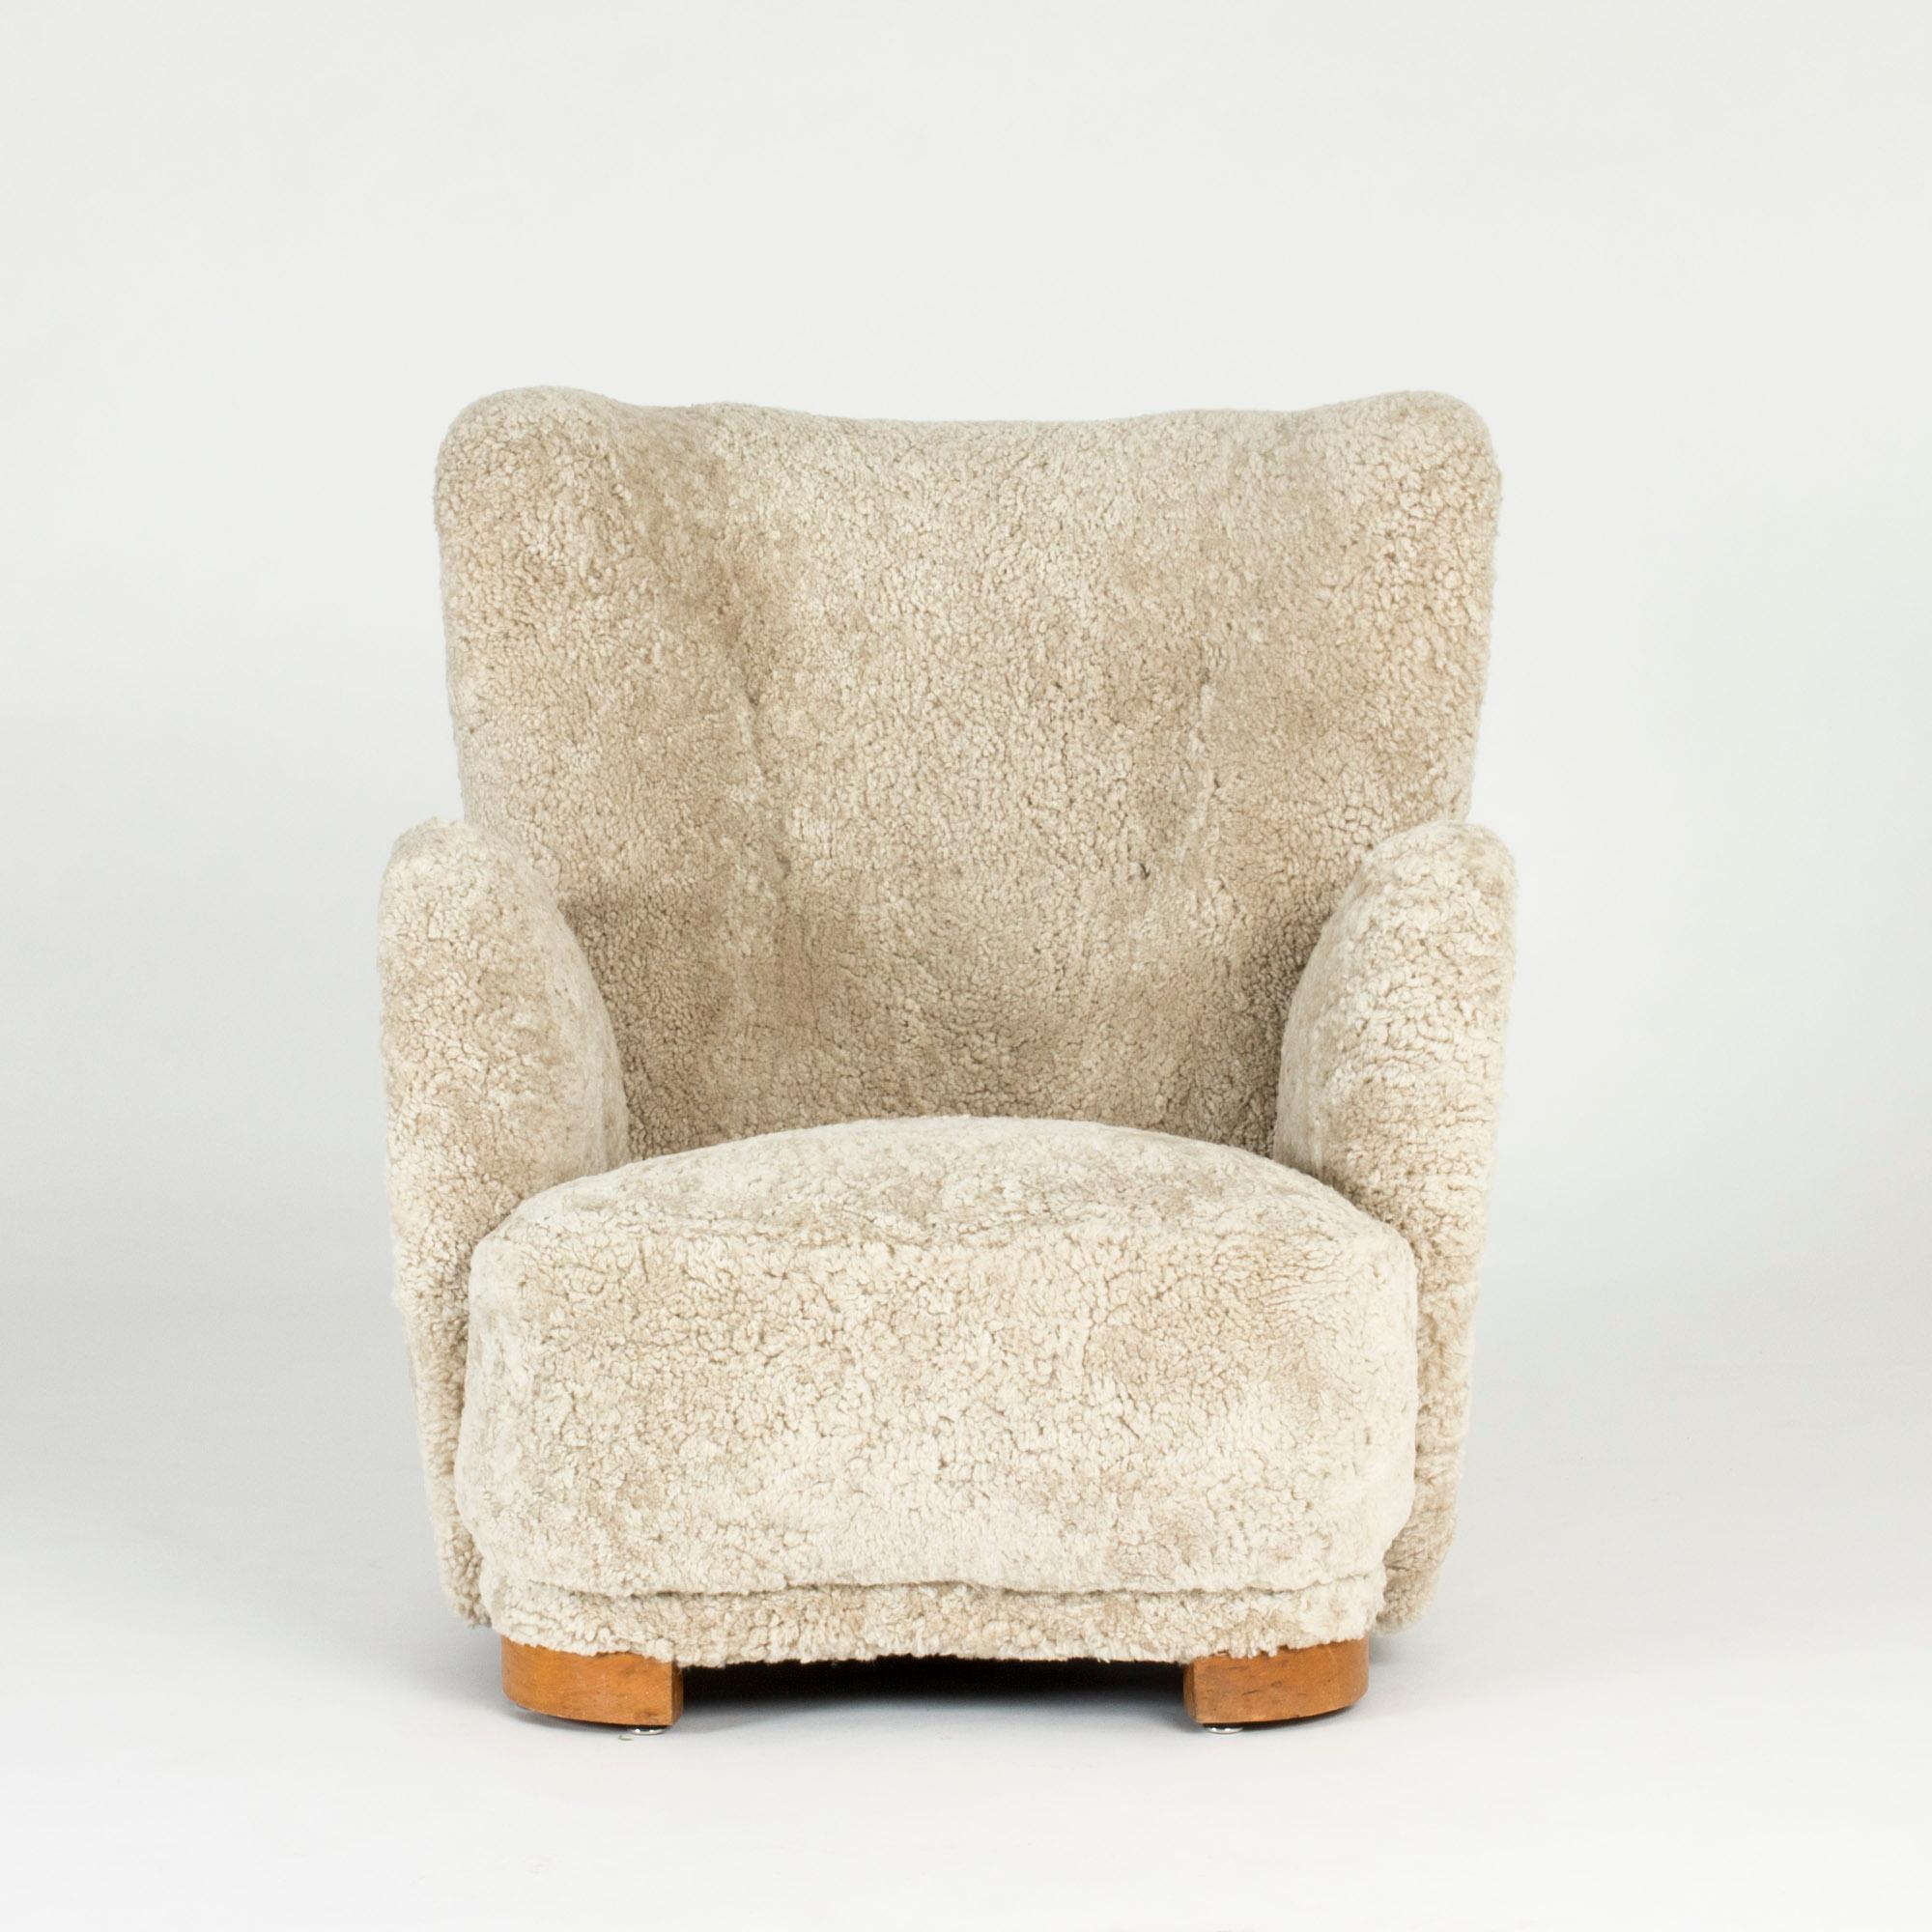 Amazing Danish, 1930s lounge chair in the style of Flemming Lassen, upholstered with cream colored sheepskin. Voluptuous shape and bold lines, a perfect cocoon.